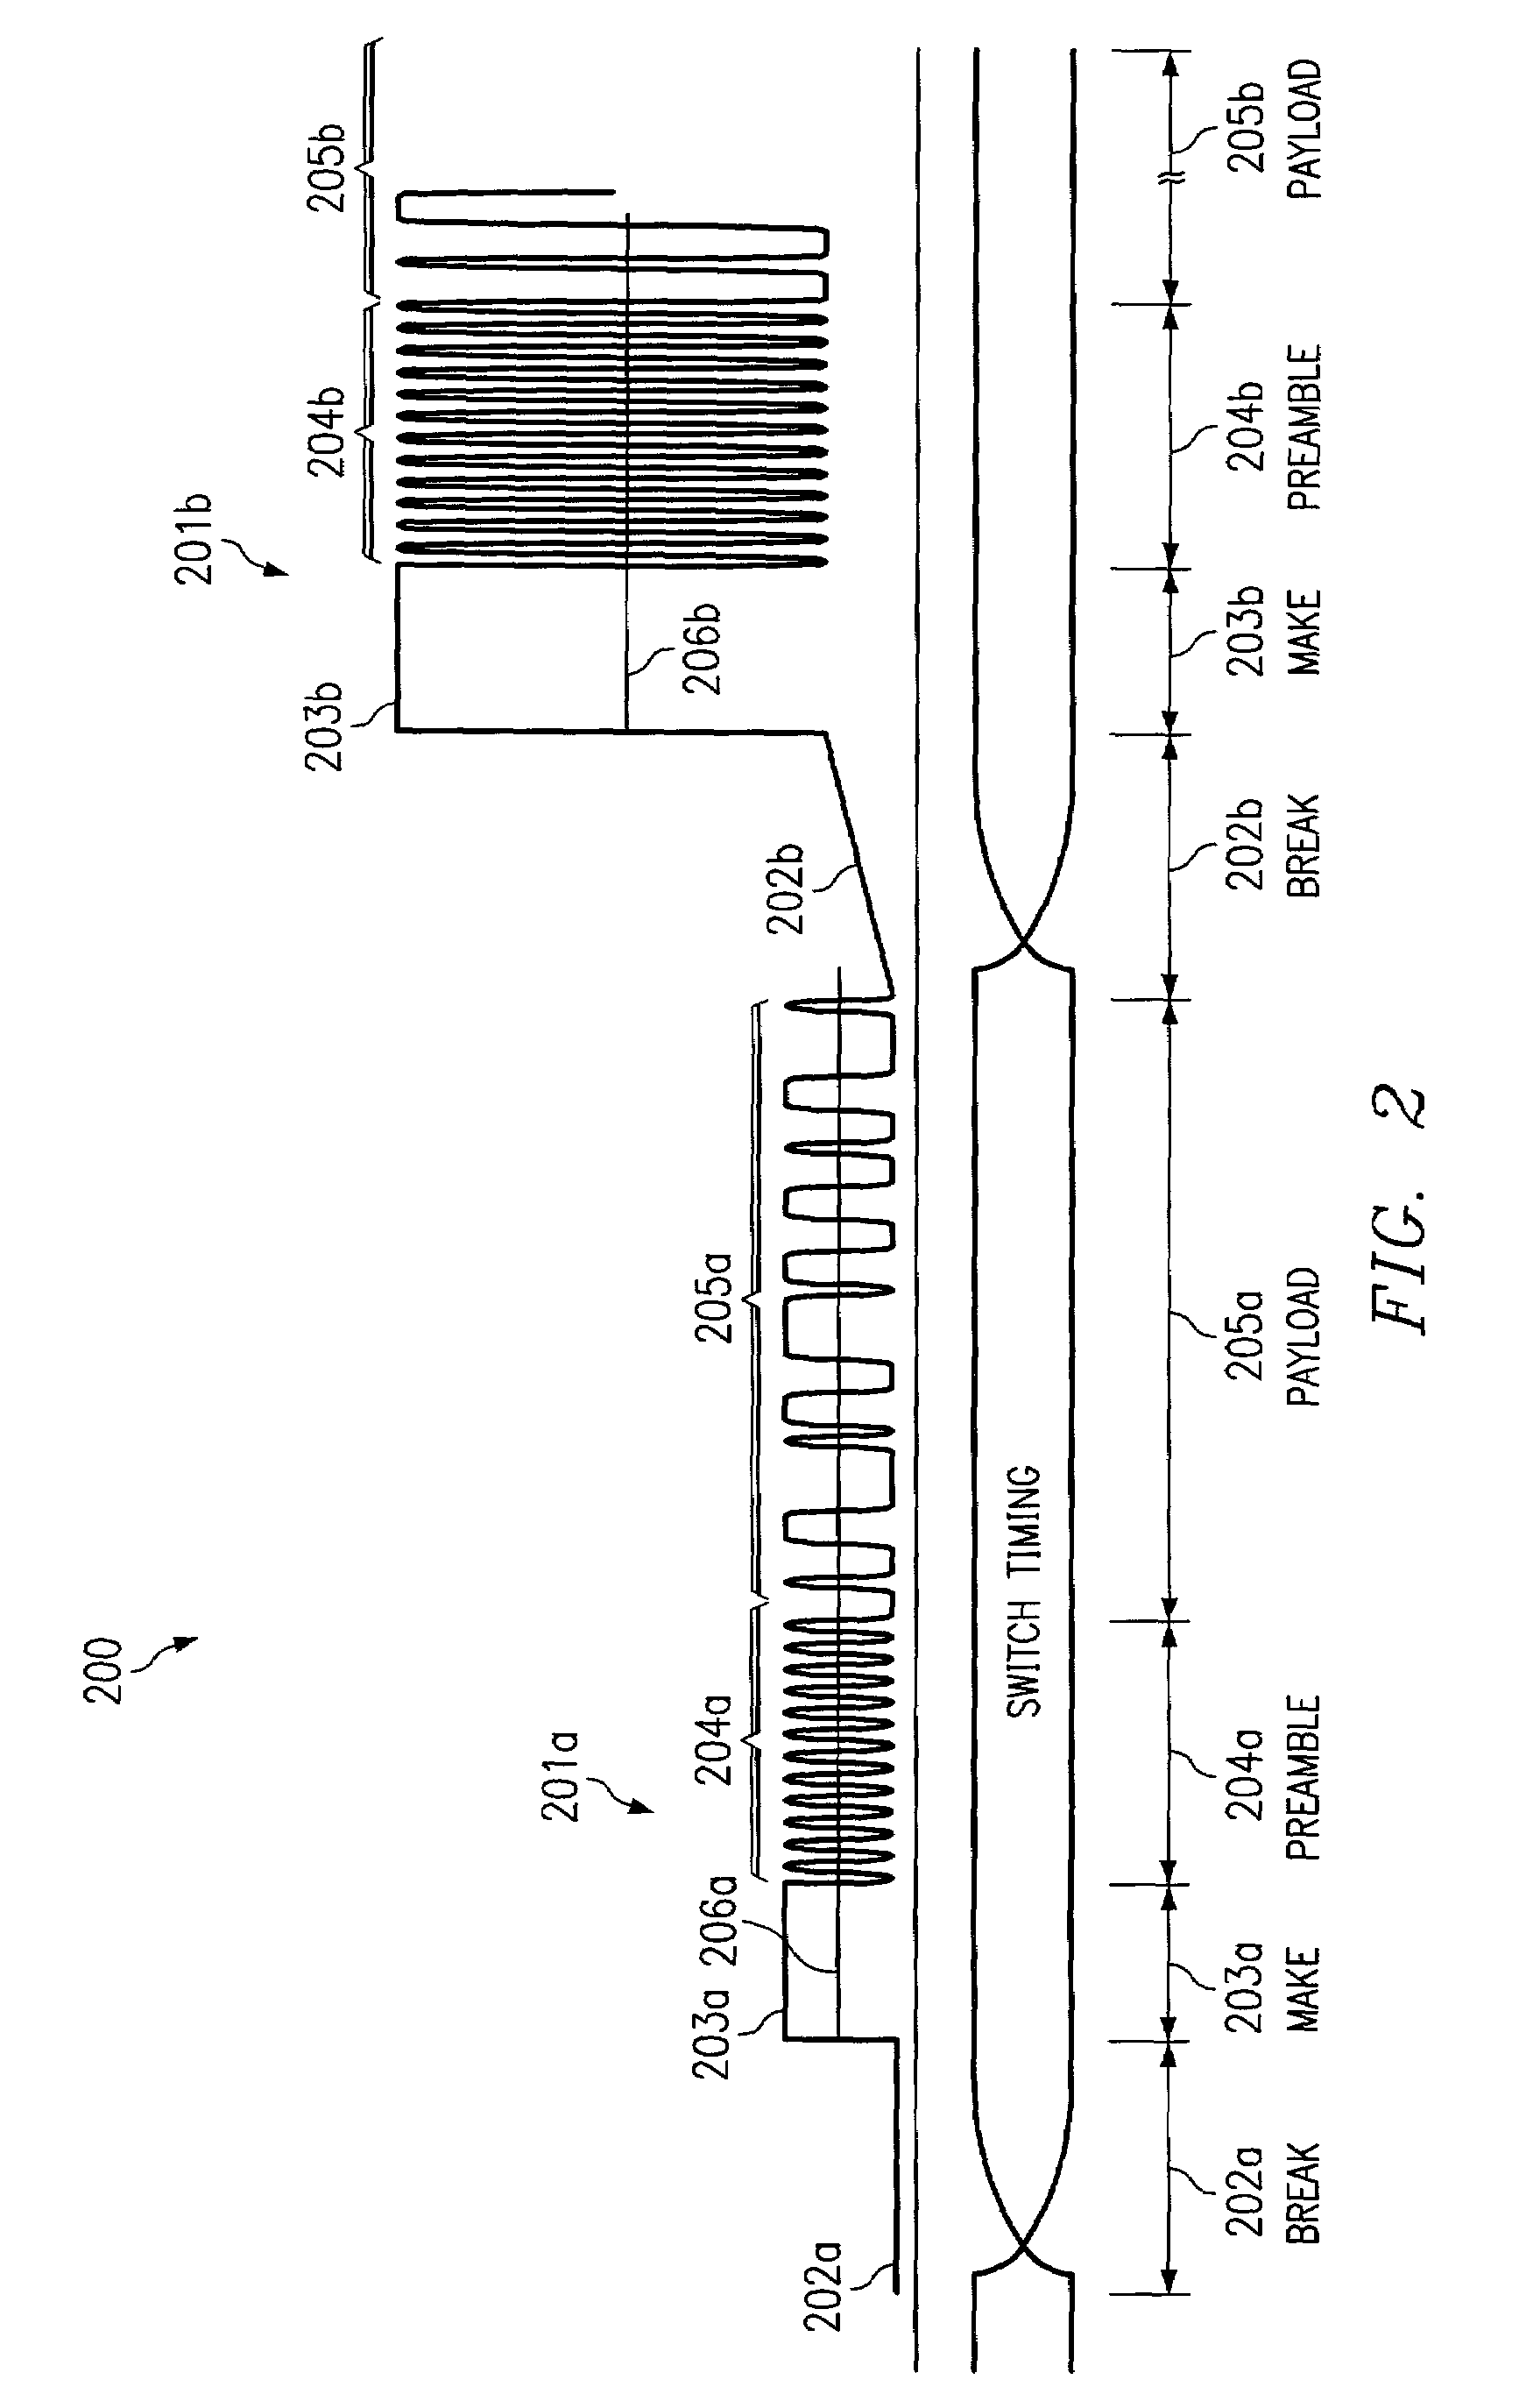 Fast decision threshold controller for burst-mode receiver